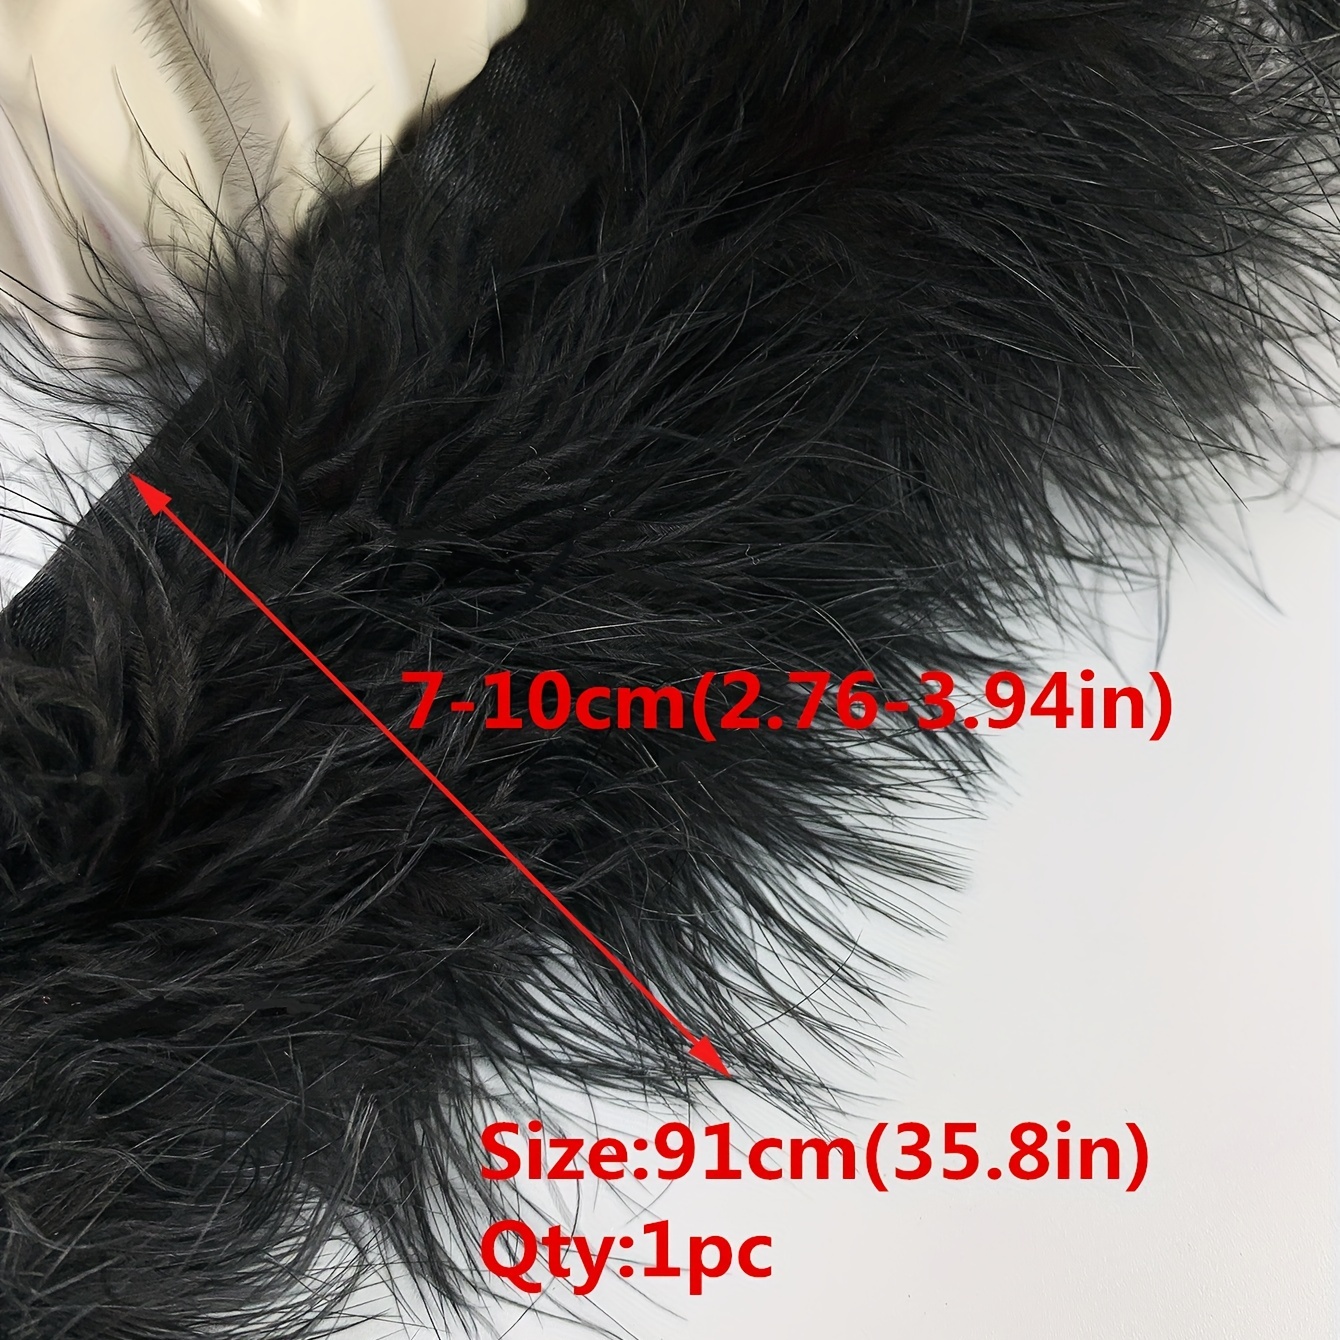 Ostrich Feathers Trim Fringe For Party Wedding Dress Sewing Crafts 2 Yards,  Feather Cloth Edge Feathers Trim Fringe For Diy Dress Sewing Crafts Costum